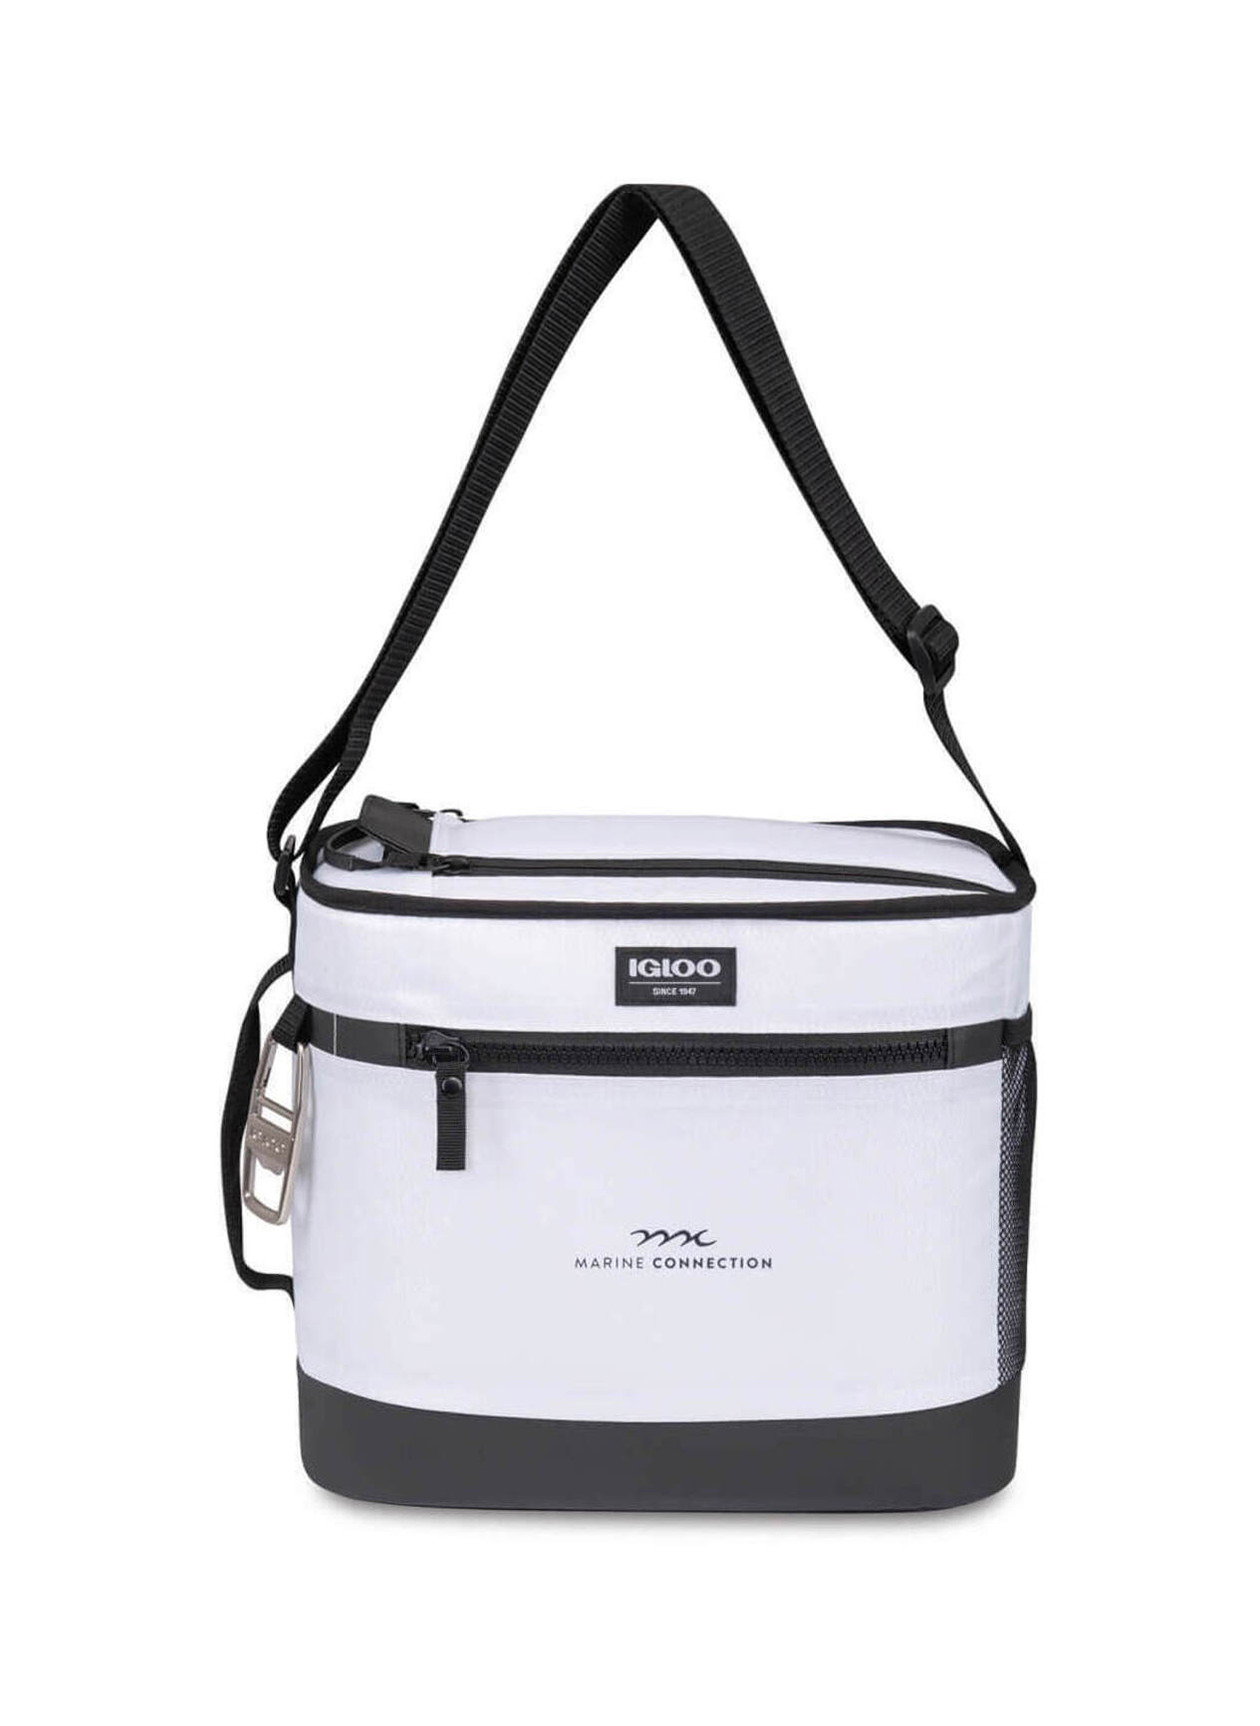 Igloo White Maddox Deluxe Cooler